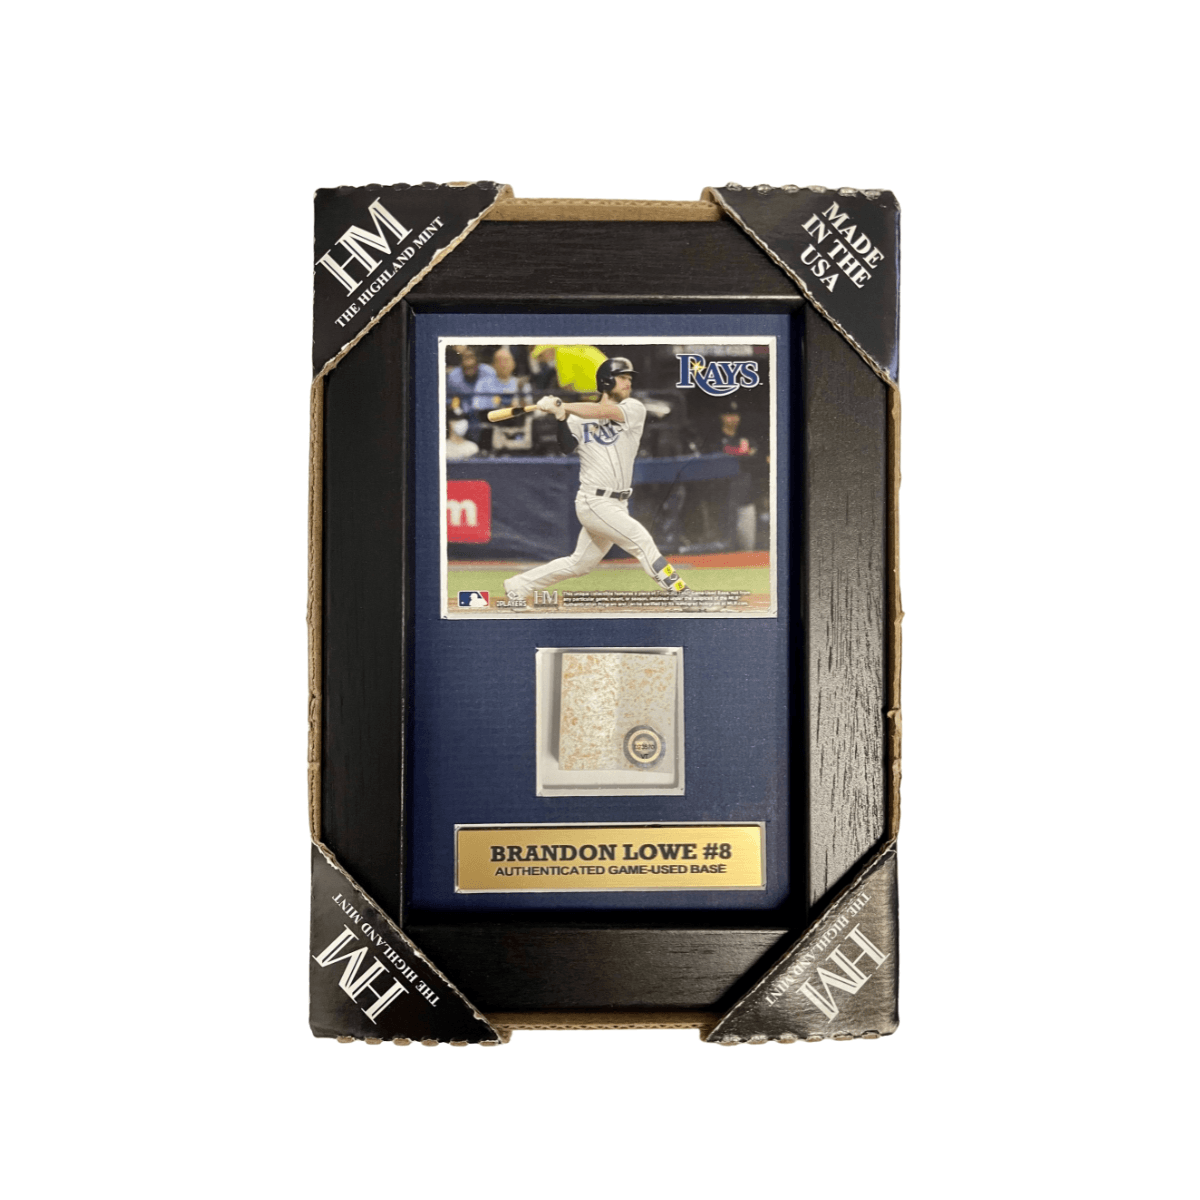 Rays Brandon Lowe Authentic Game-Used Base Piece 5x7 Display